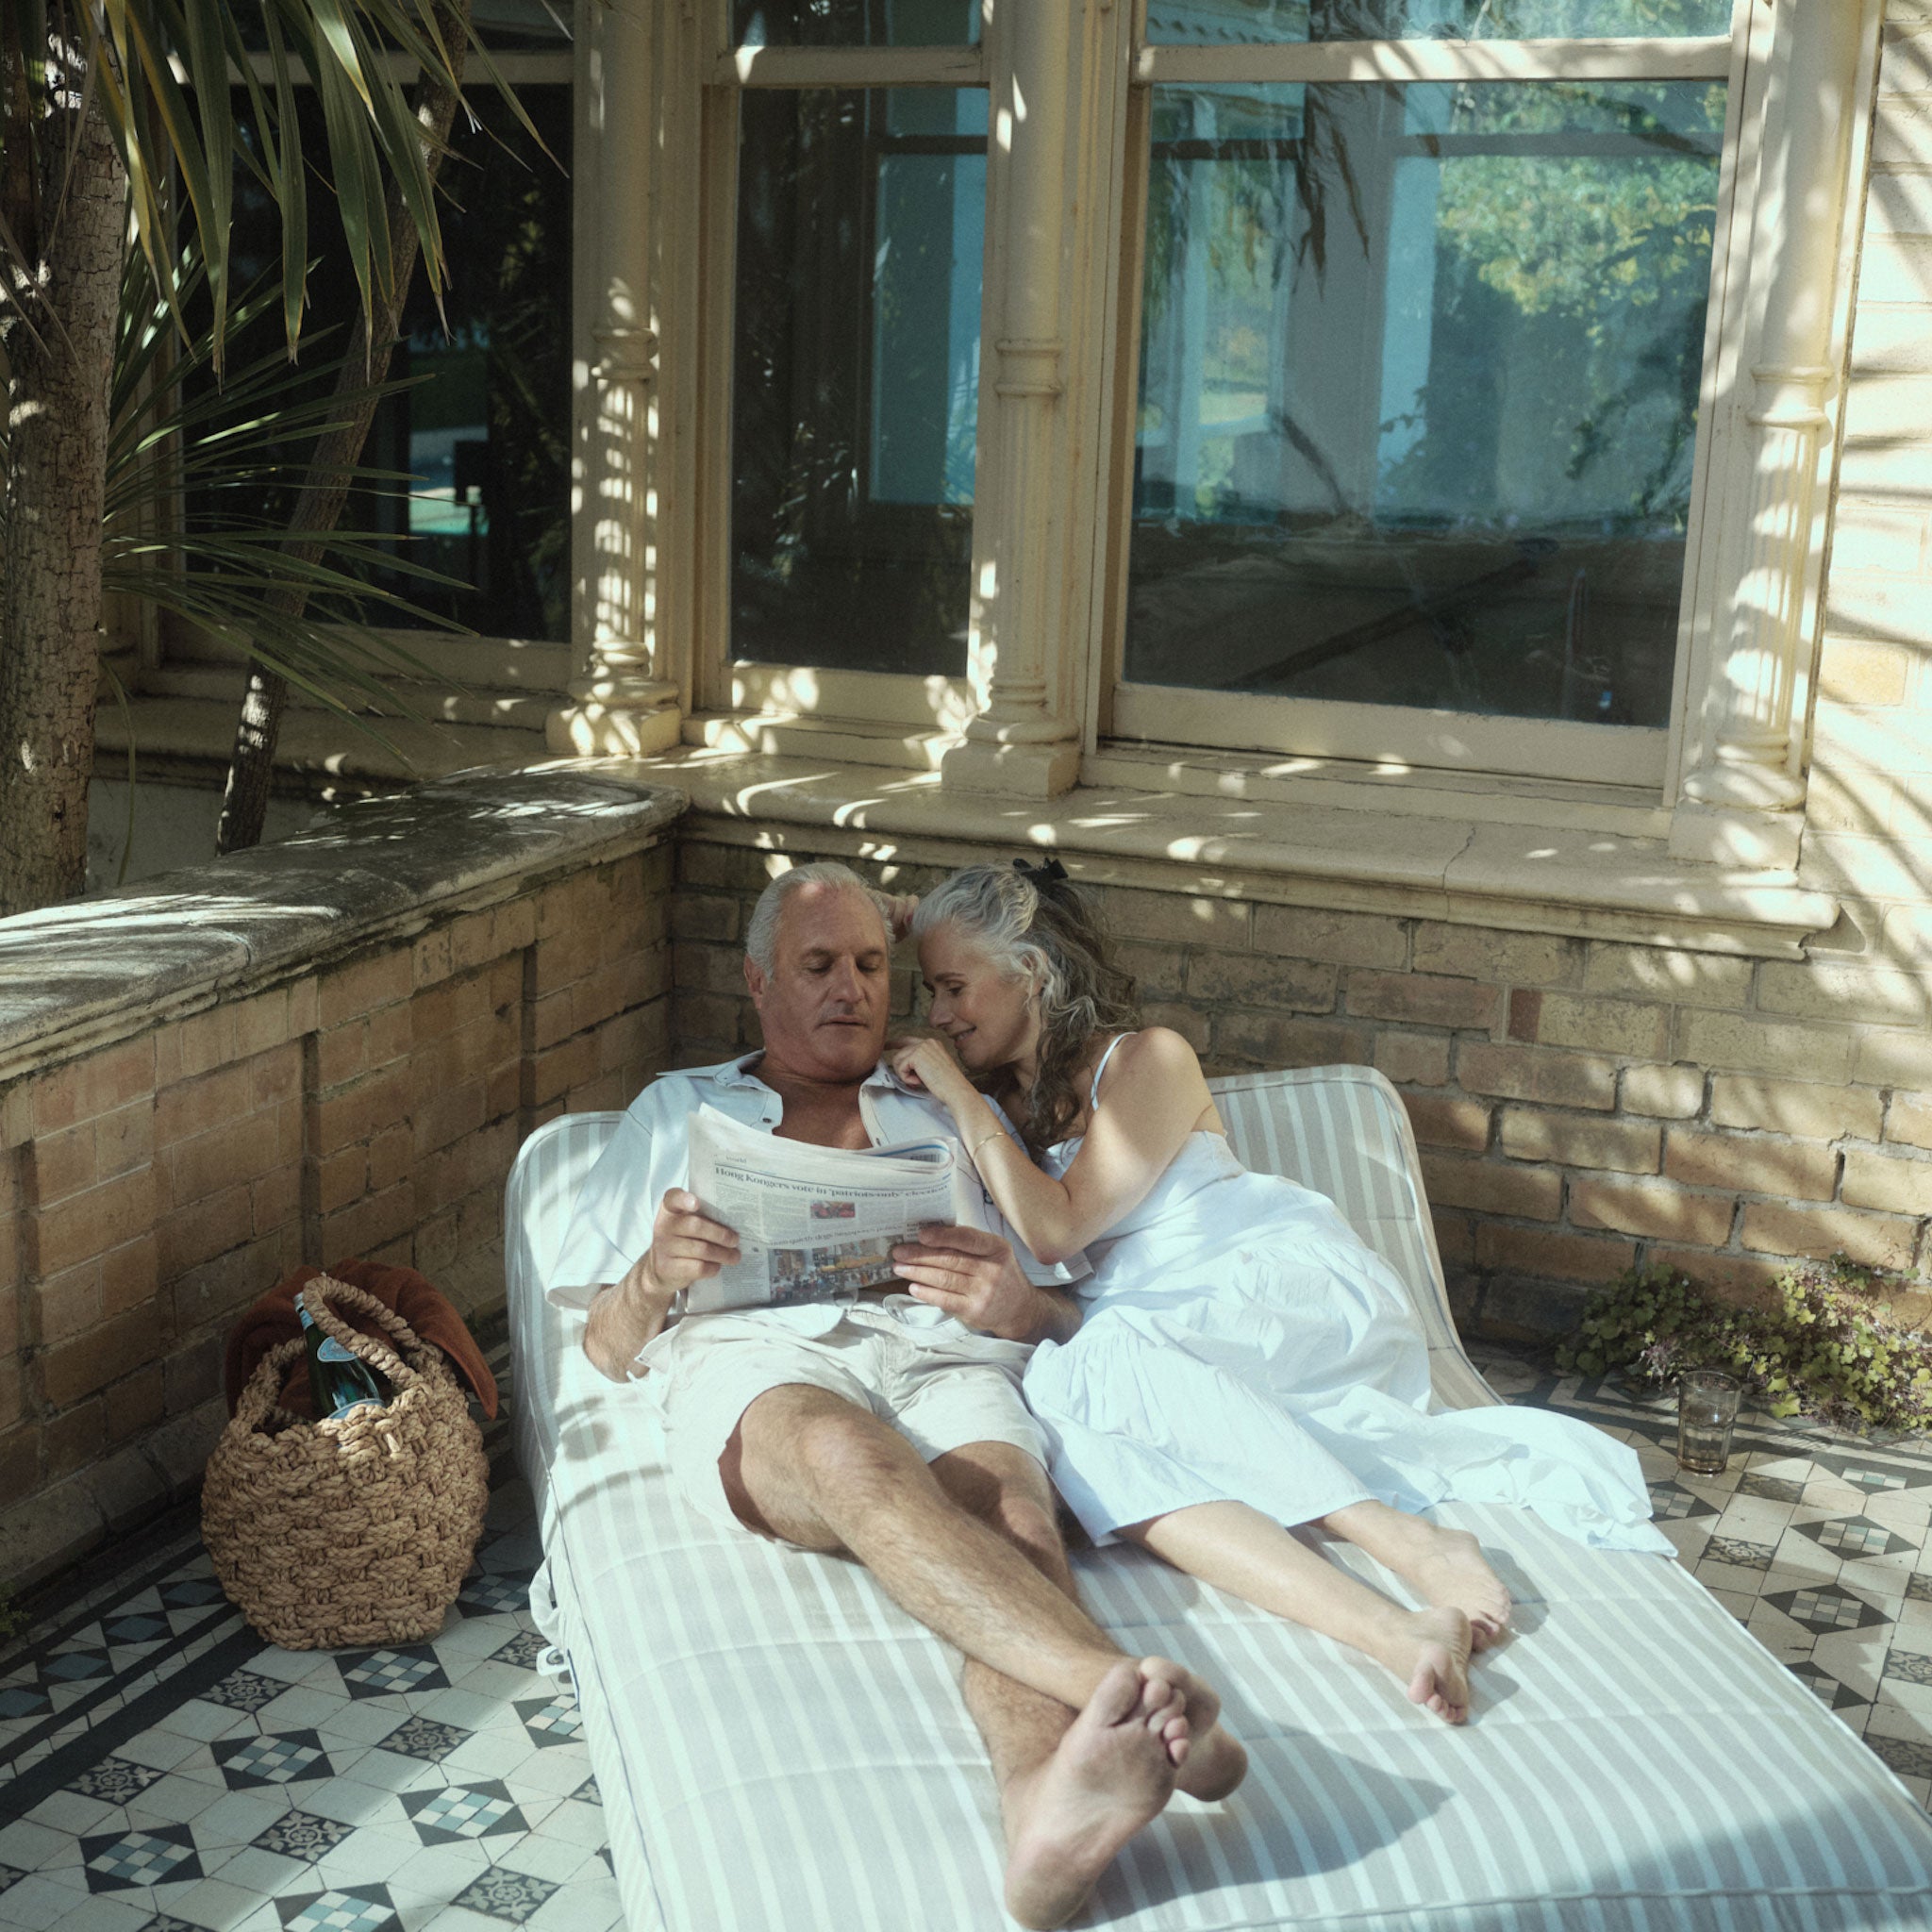 An elderly couple sitting on a beige and white striped pool float lounger for adults on the terrace of a home.